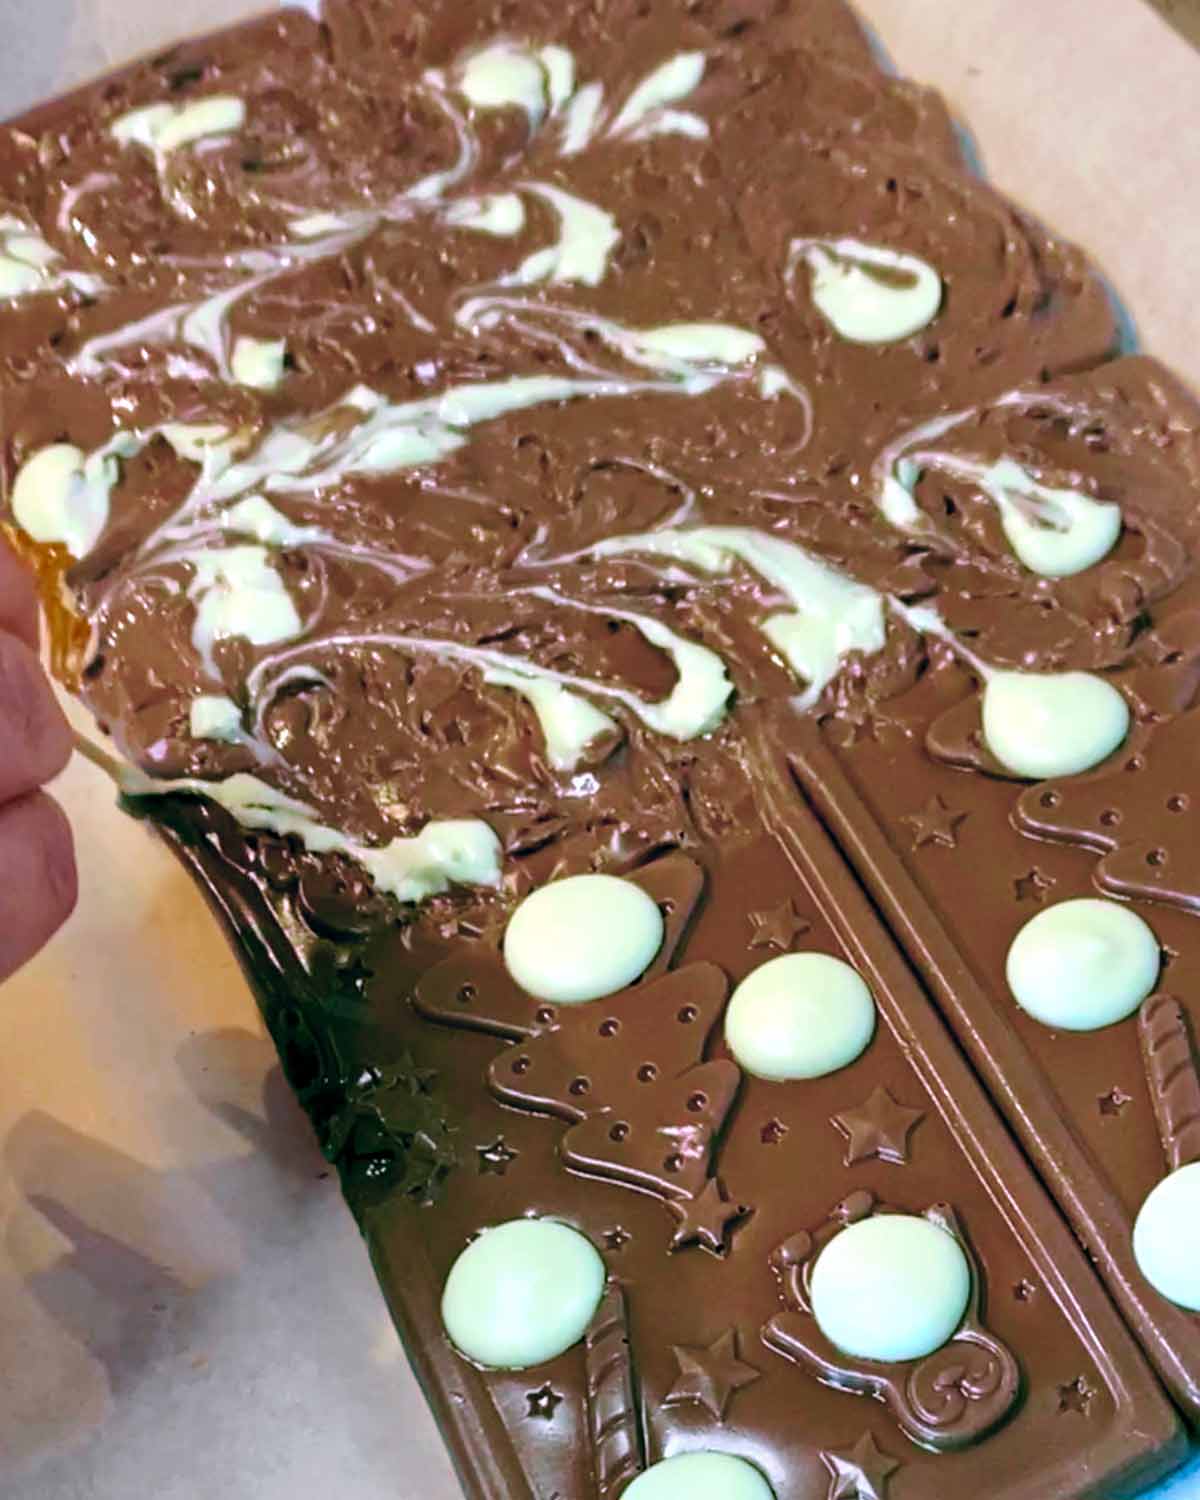 A hand swirling the melted chocolate with a cocktail stick.